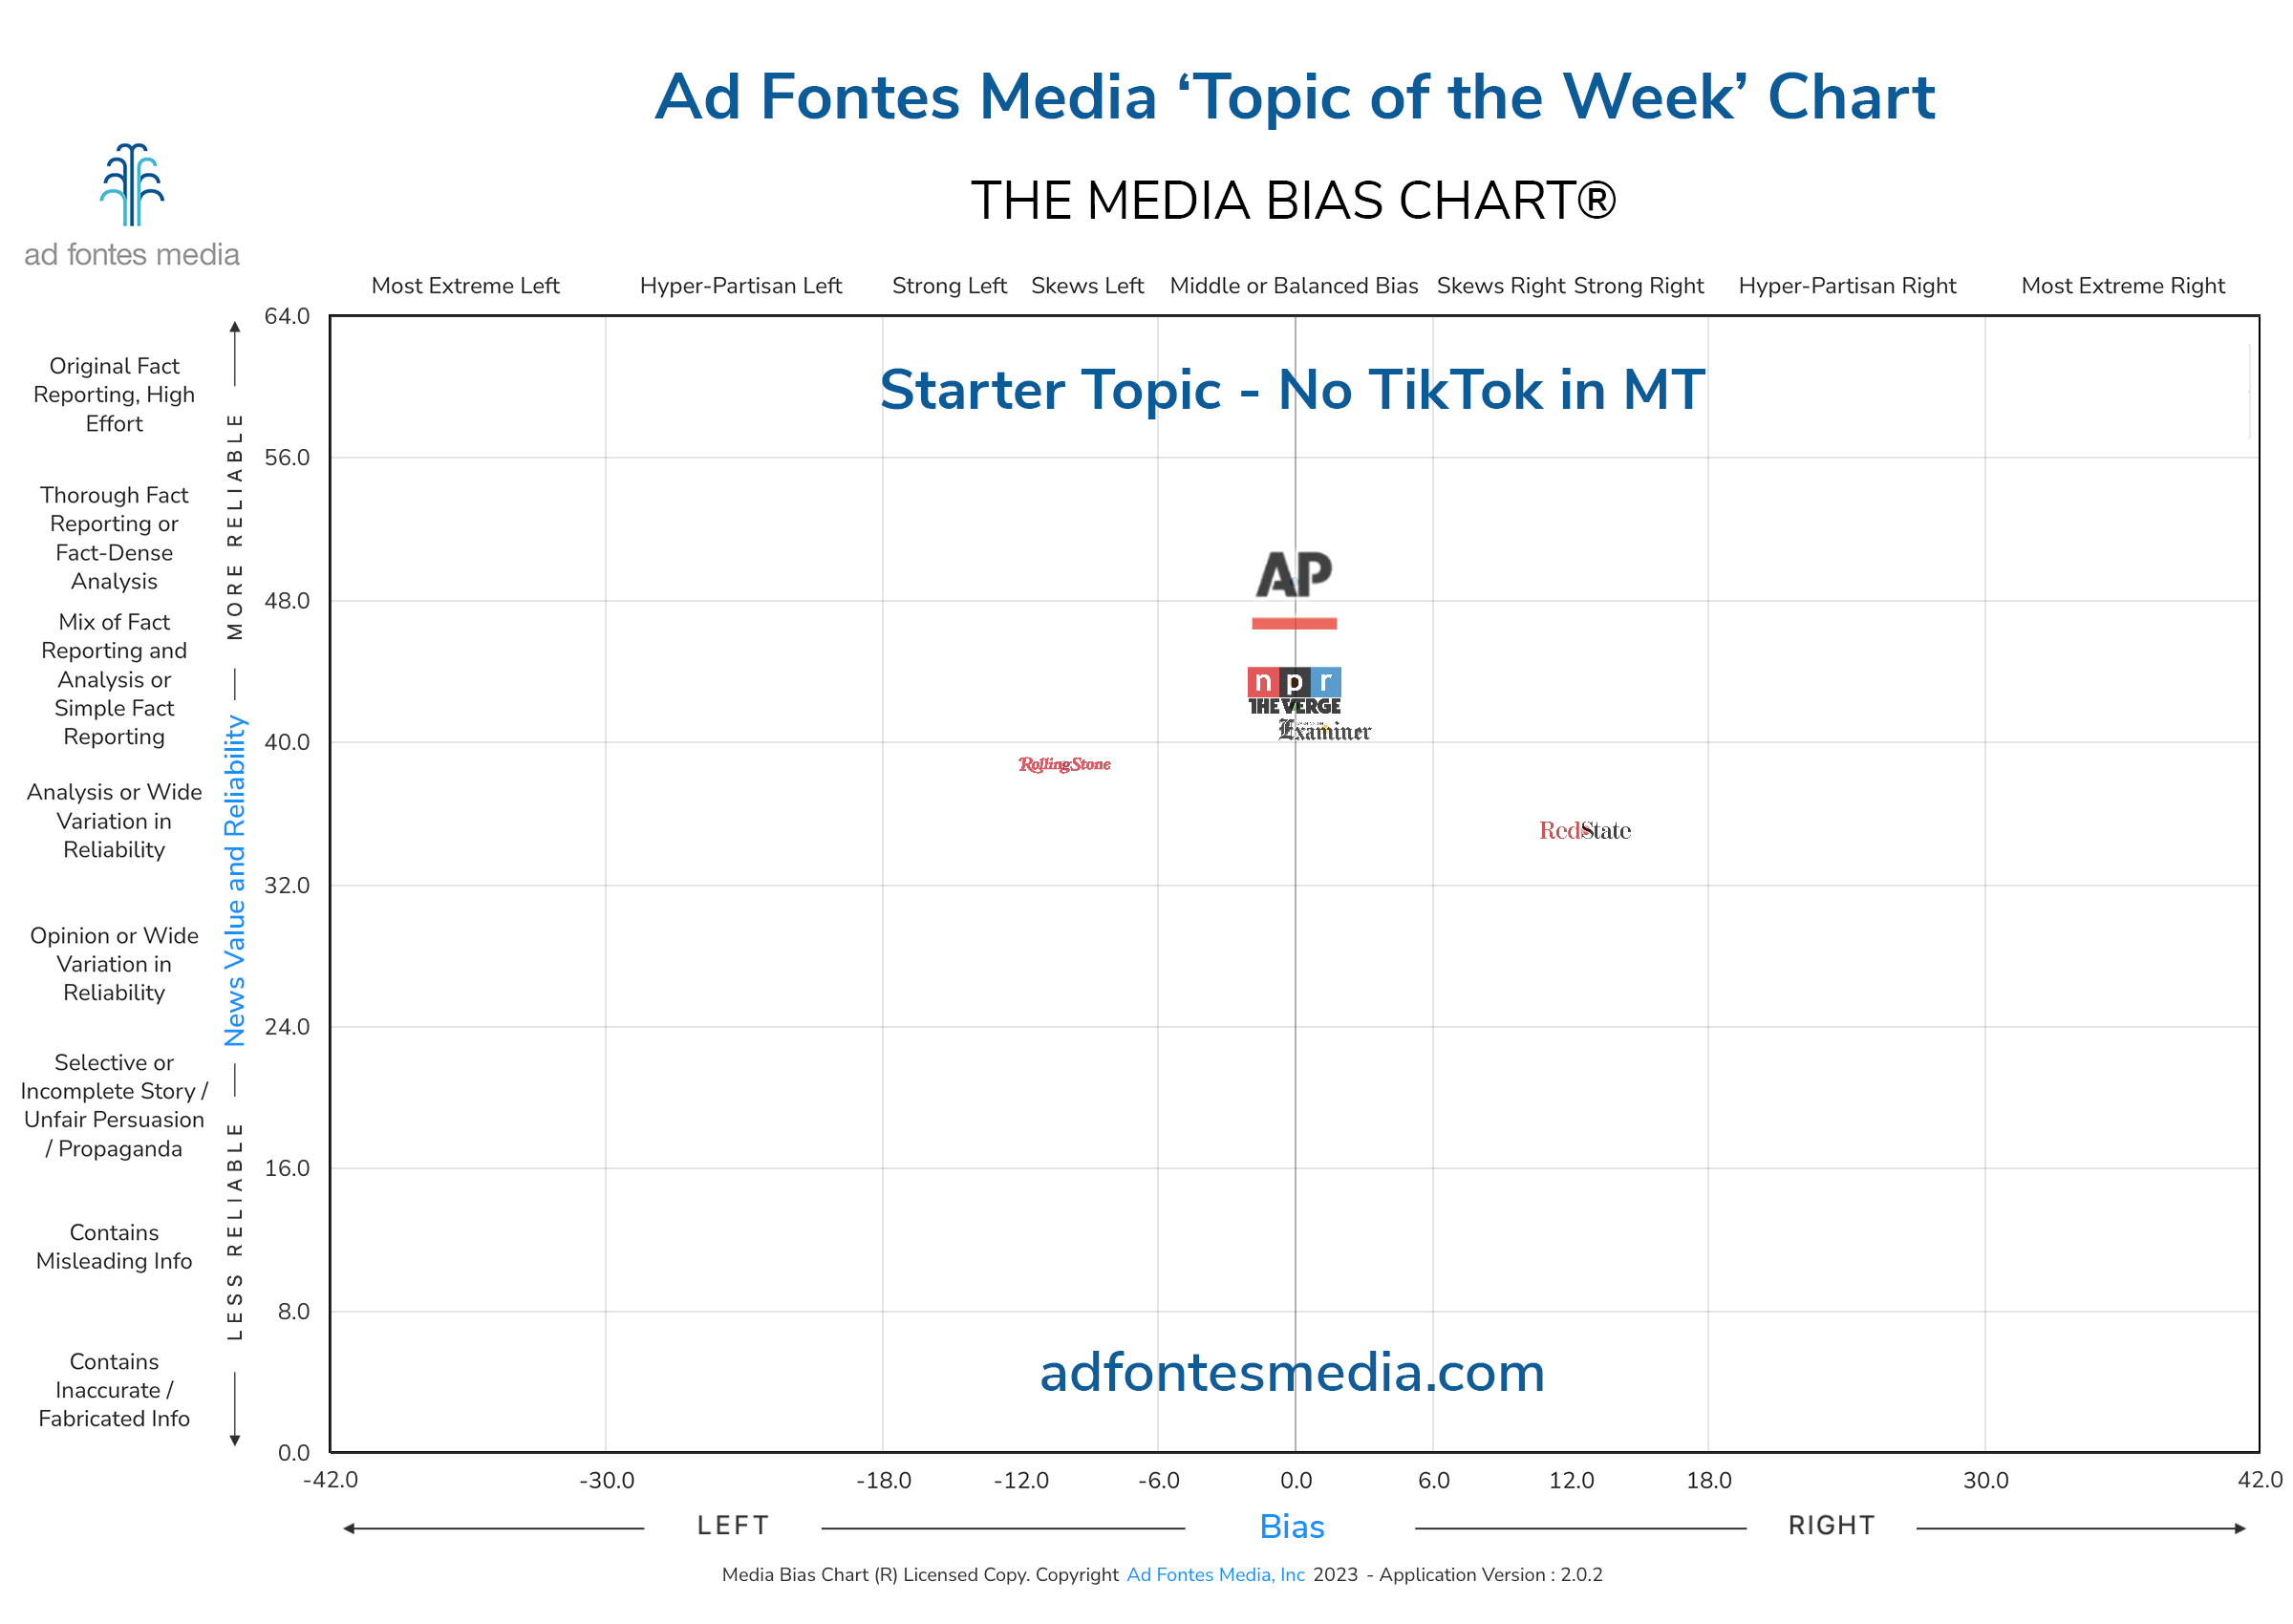 Scores of the No TikTok in MT articles on the chart